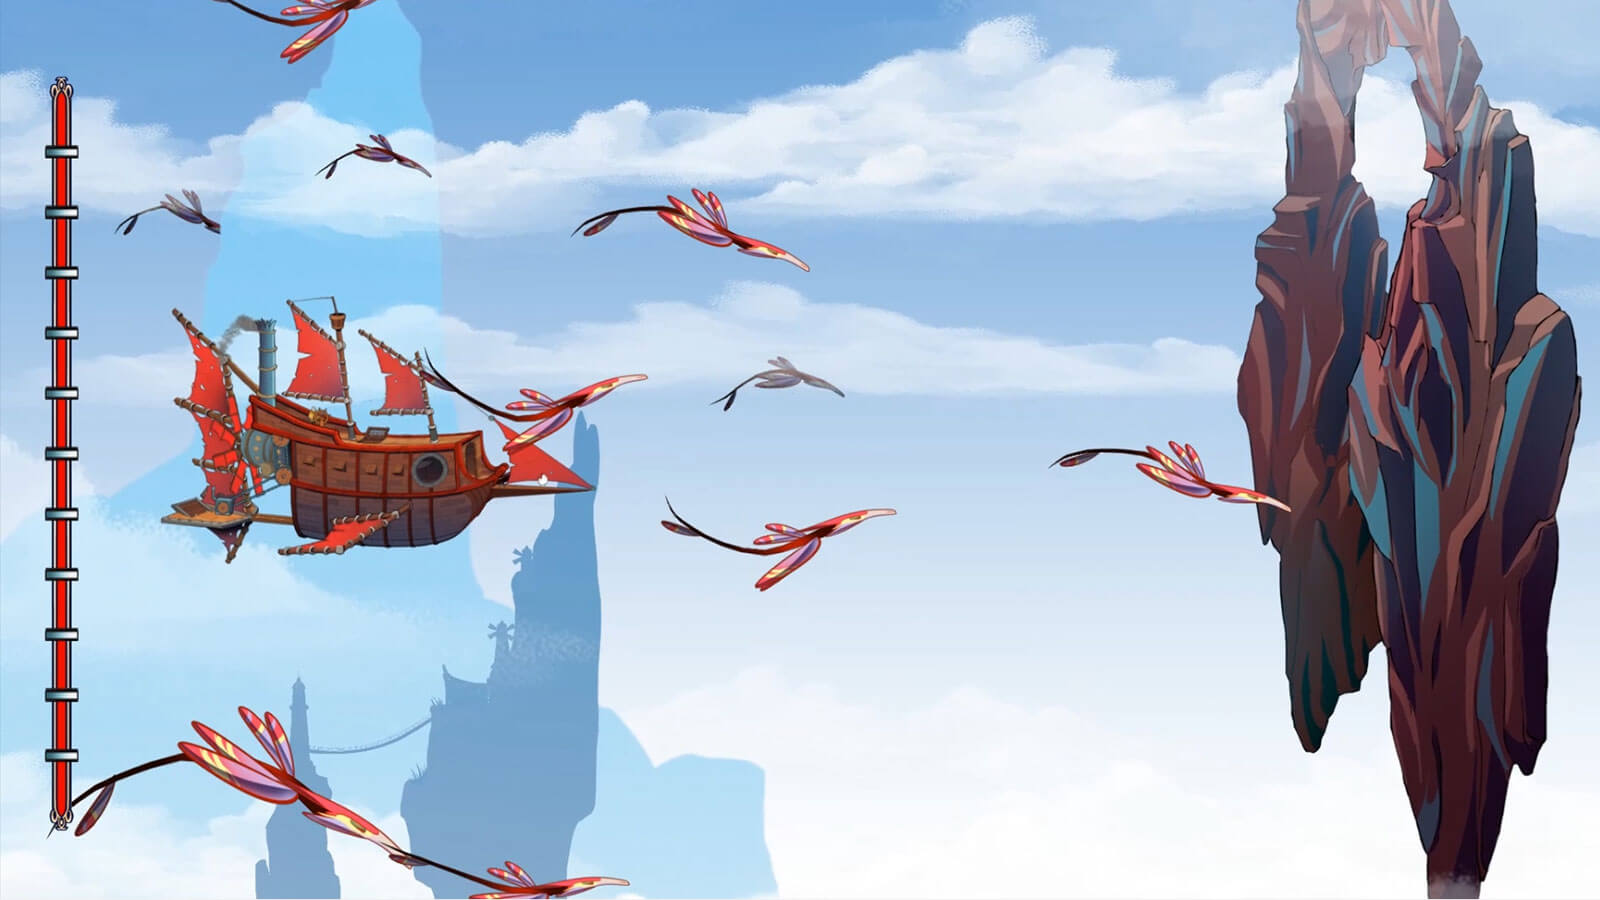 A pirate ship flies in the sky alongside exotic birds